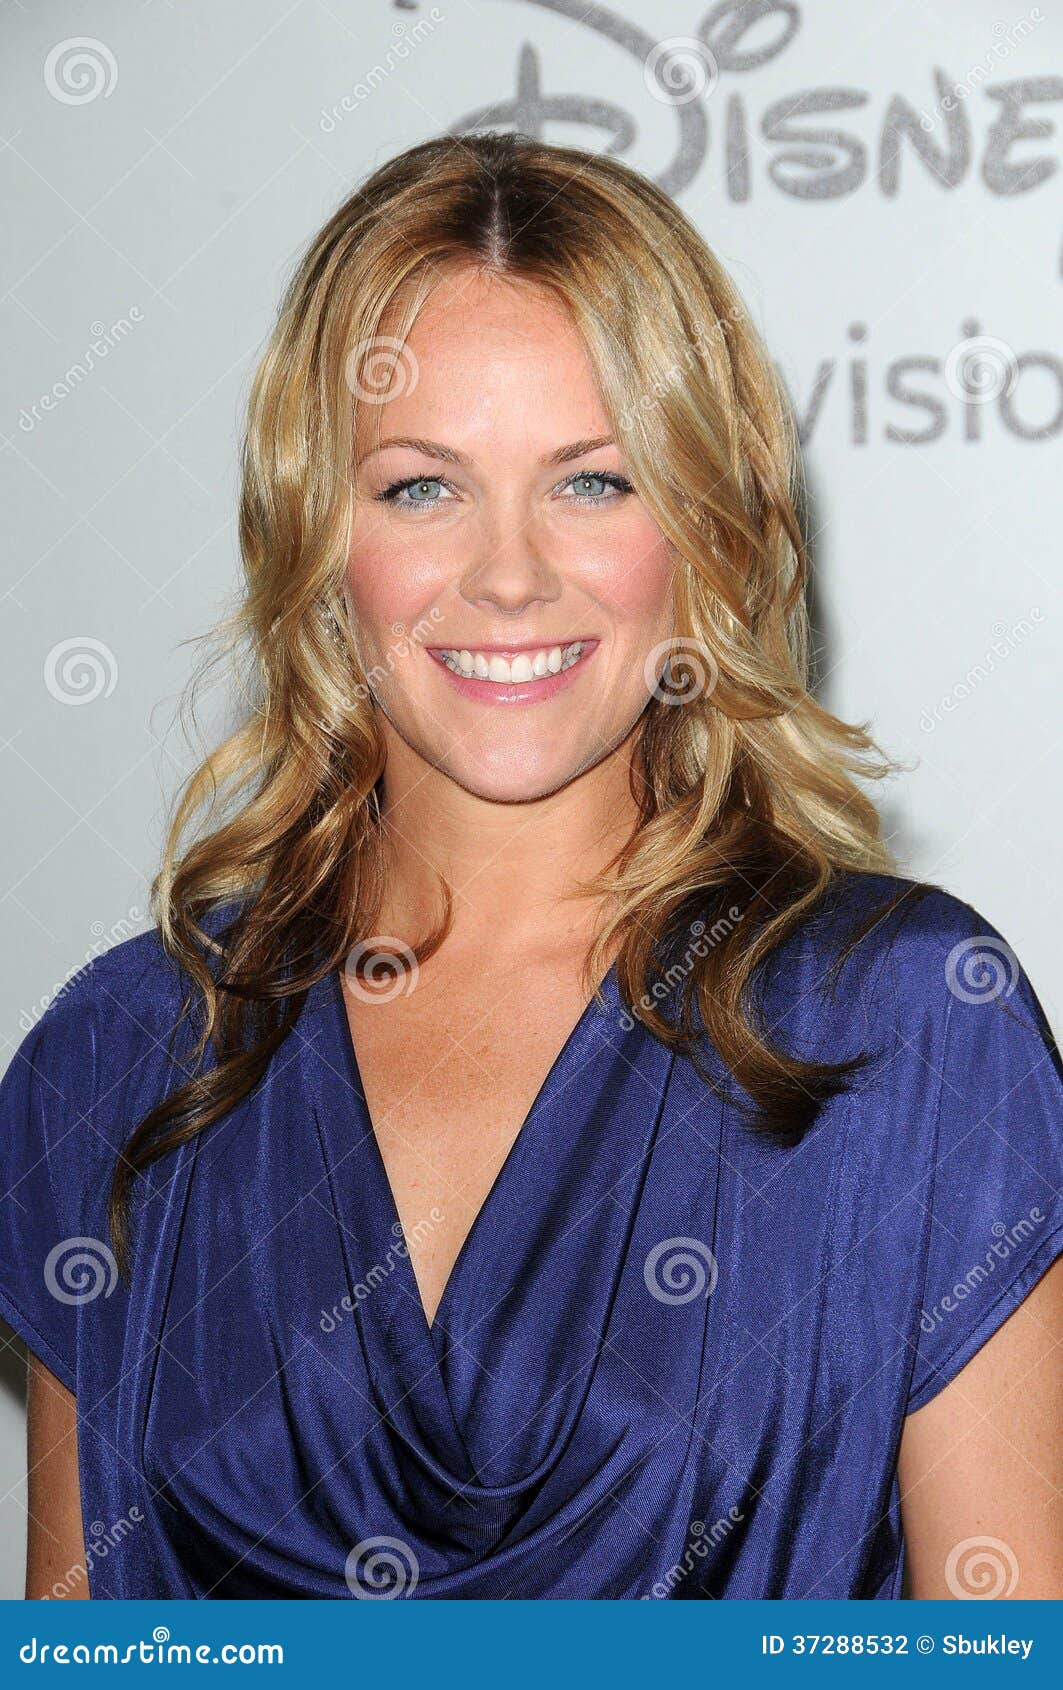 Pictures of andrea anders